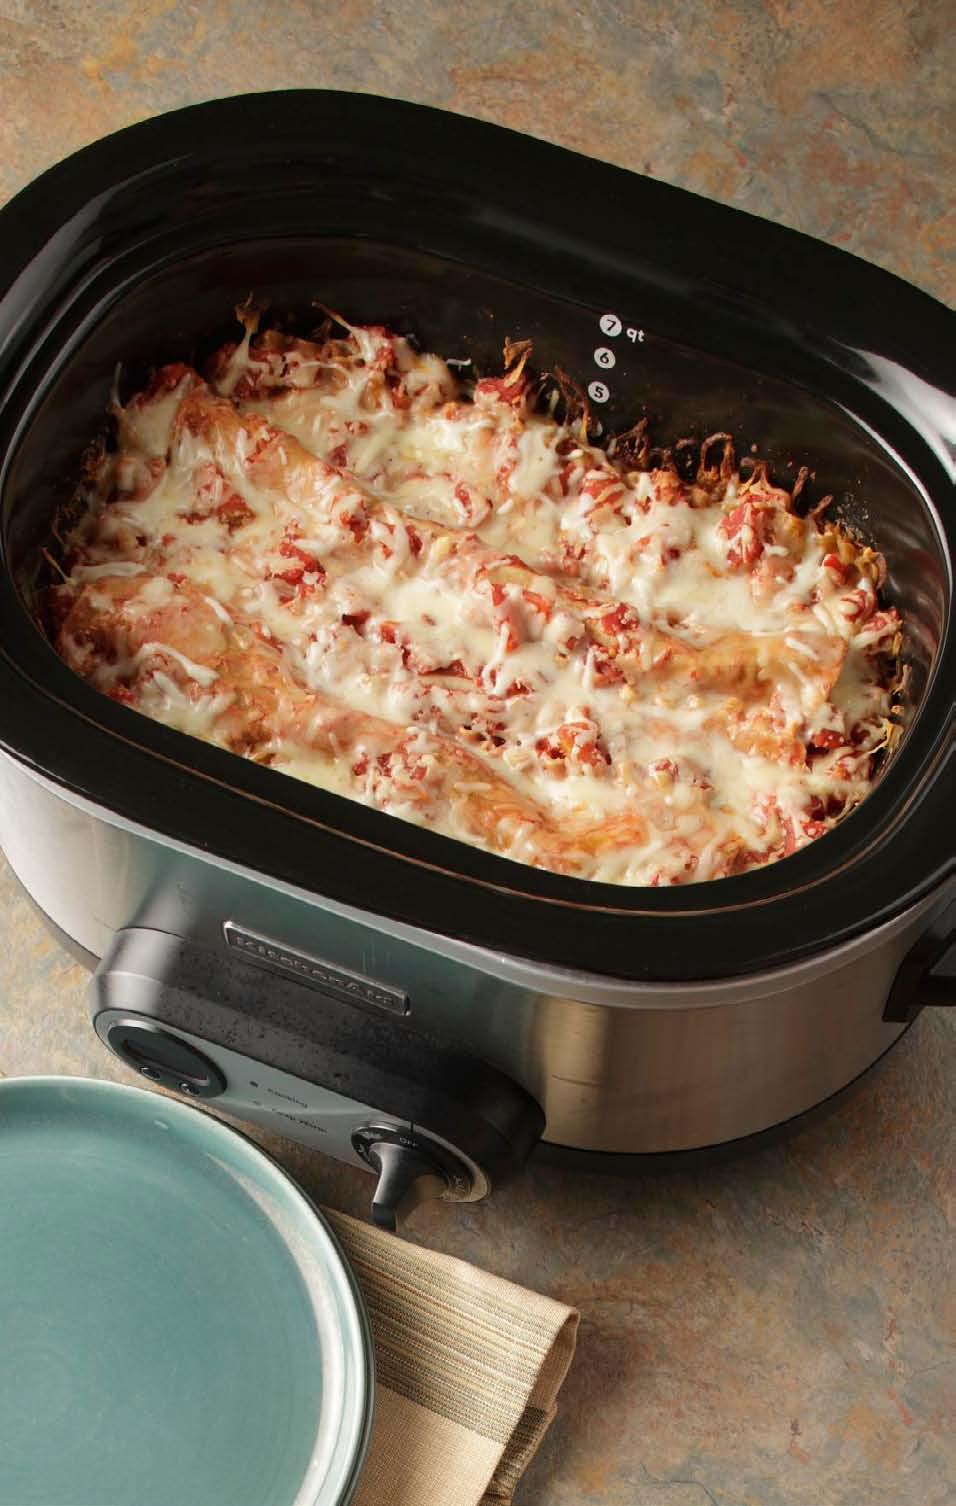 Slow-Cooker Vegetarian Lasagna Makes: 8 servings Active time: 30 minutes Slow-cooker time: 2 hours on High or 4 hours on Low Equipment: 6-quart (or larger) slow cooker Sure, the slow cooker s great